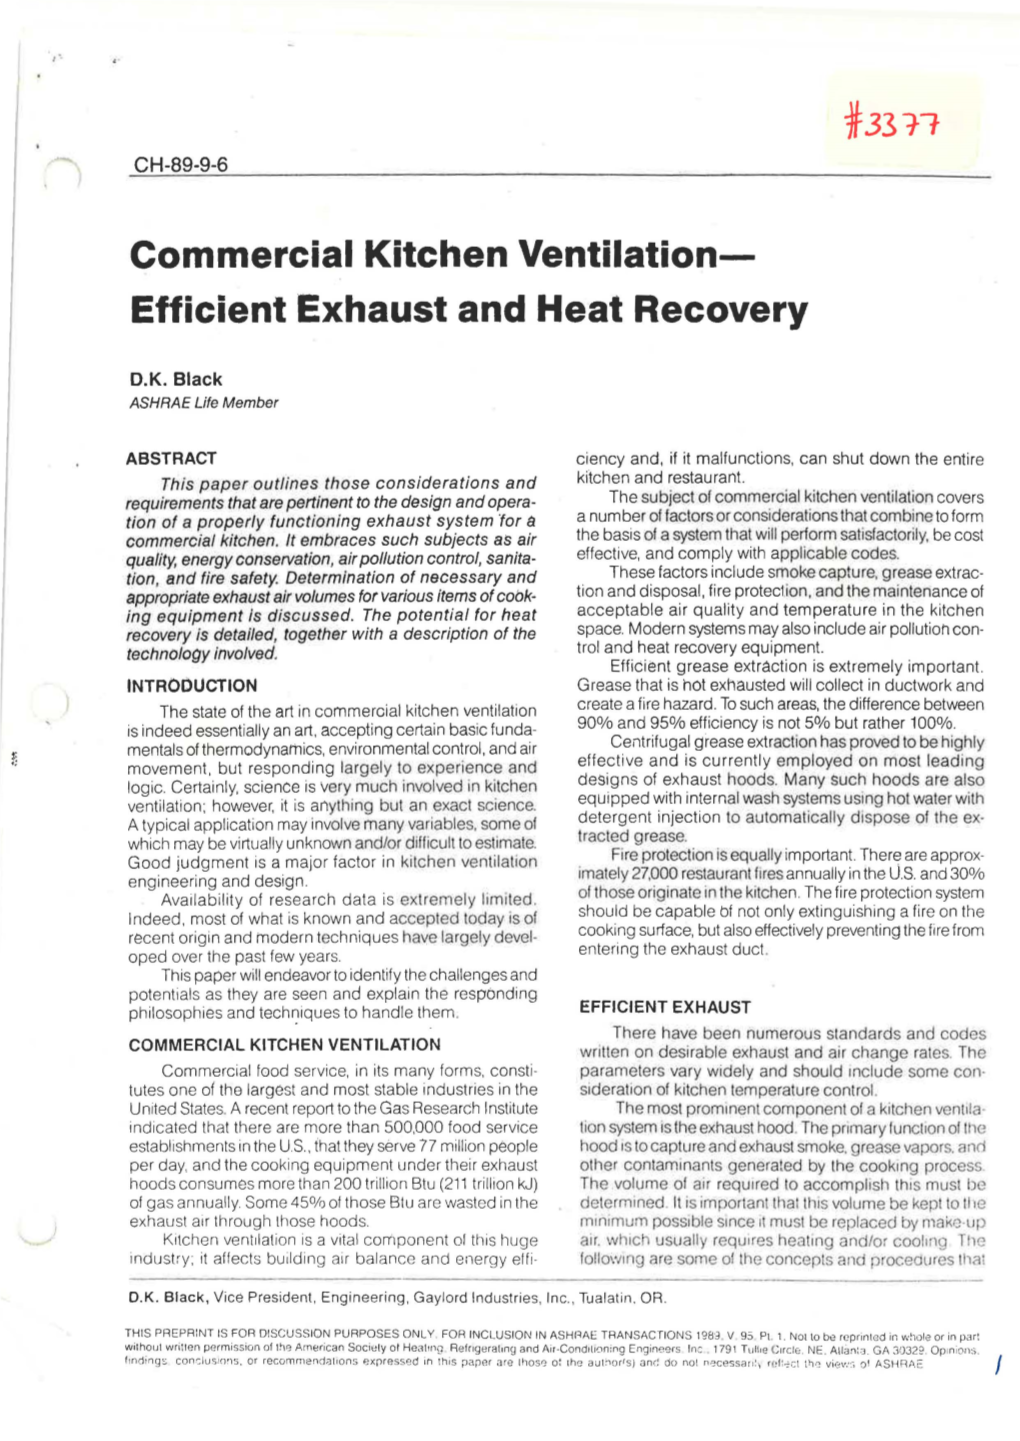 Commercial Kitchen Ventilation- Efficient Exhaust and Heat Recovery